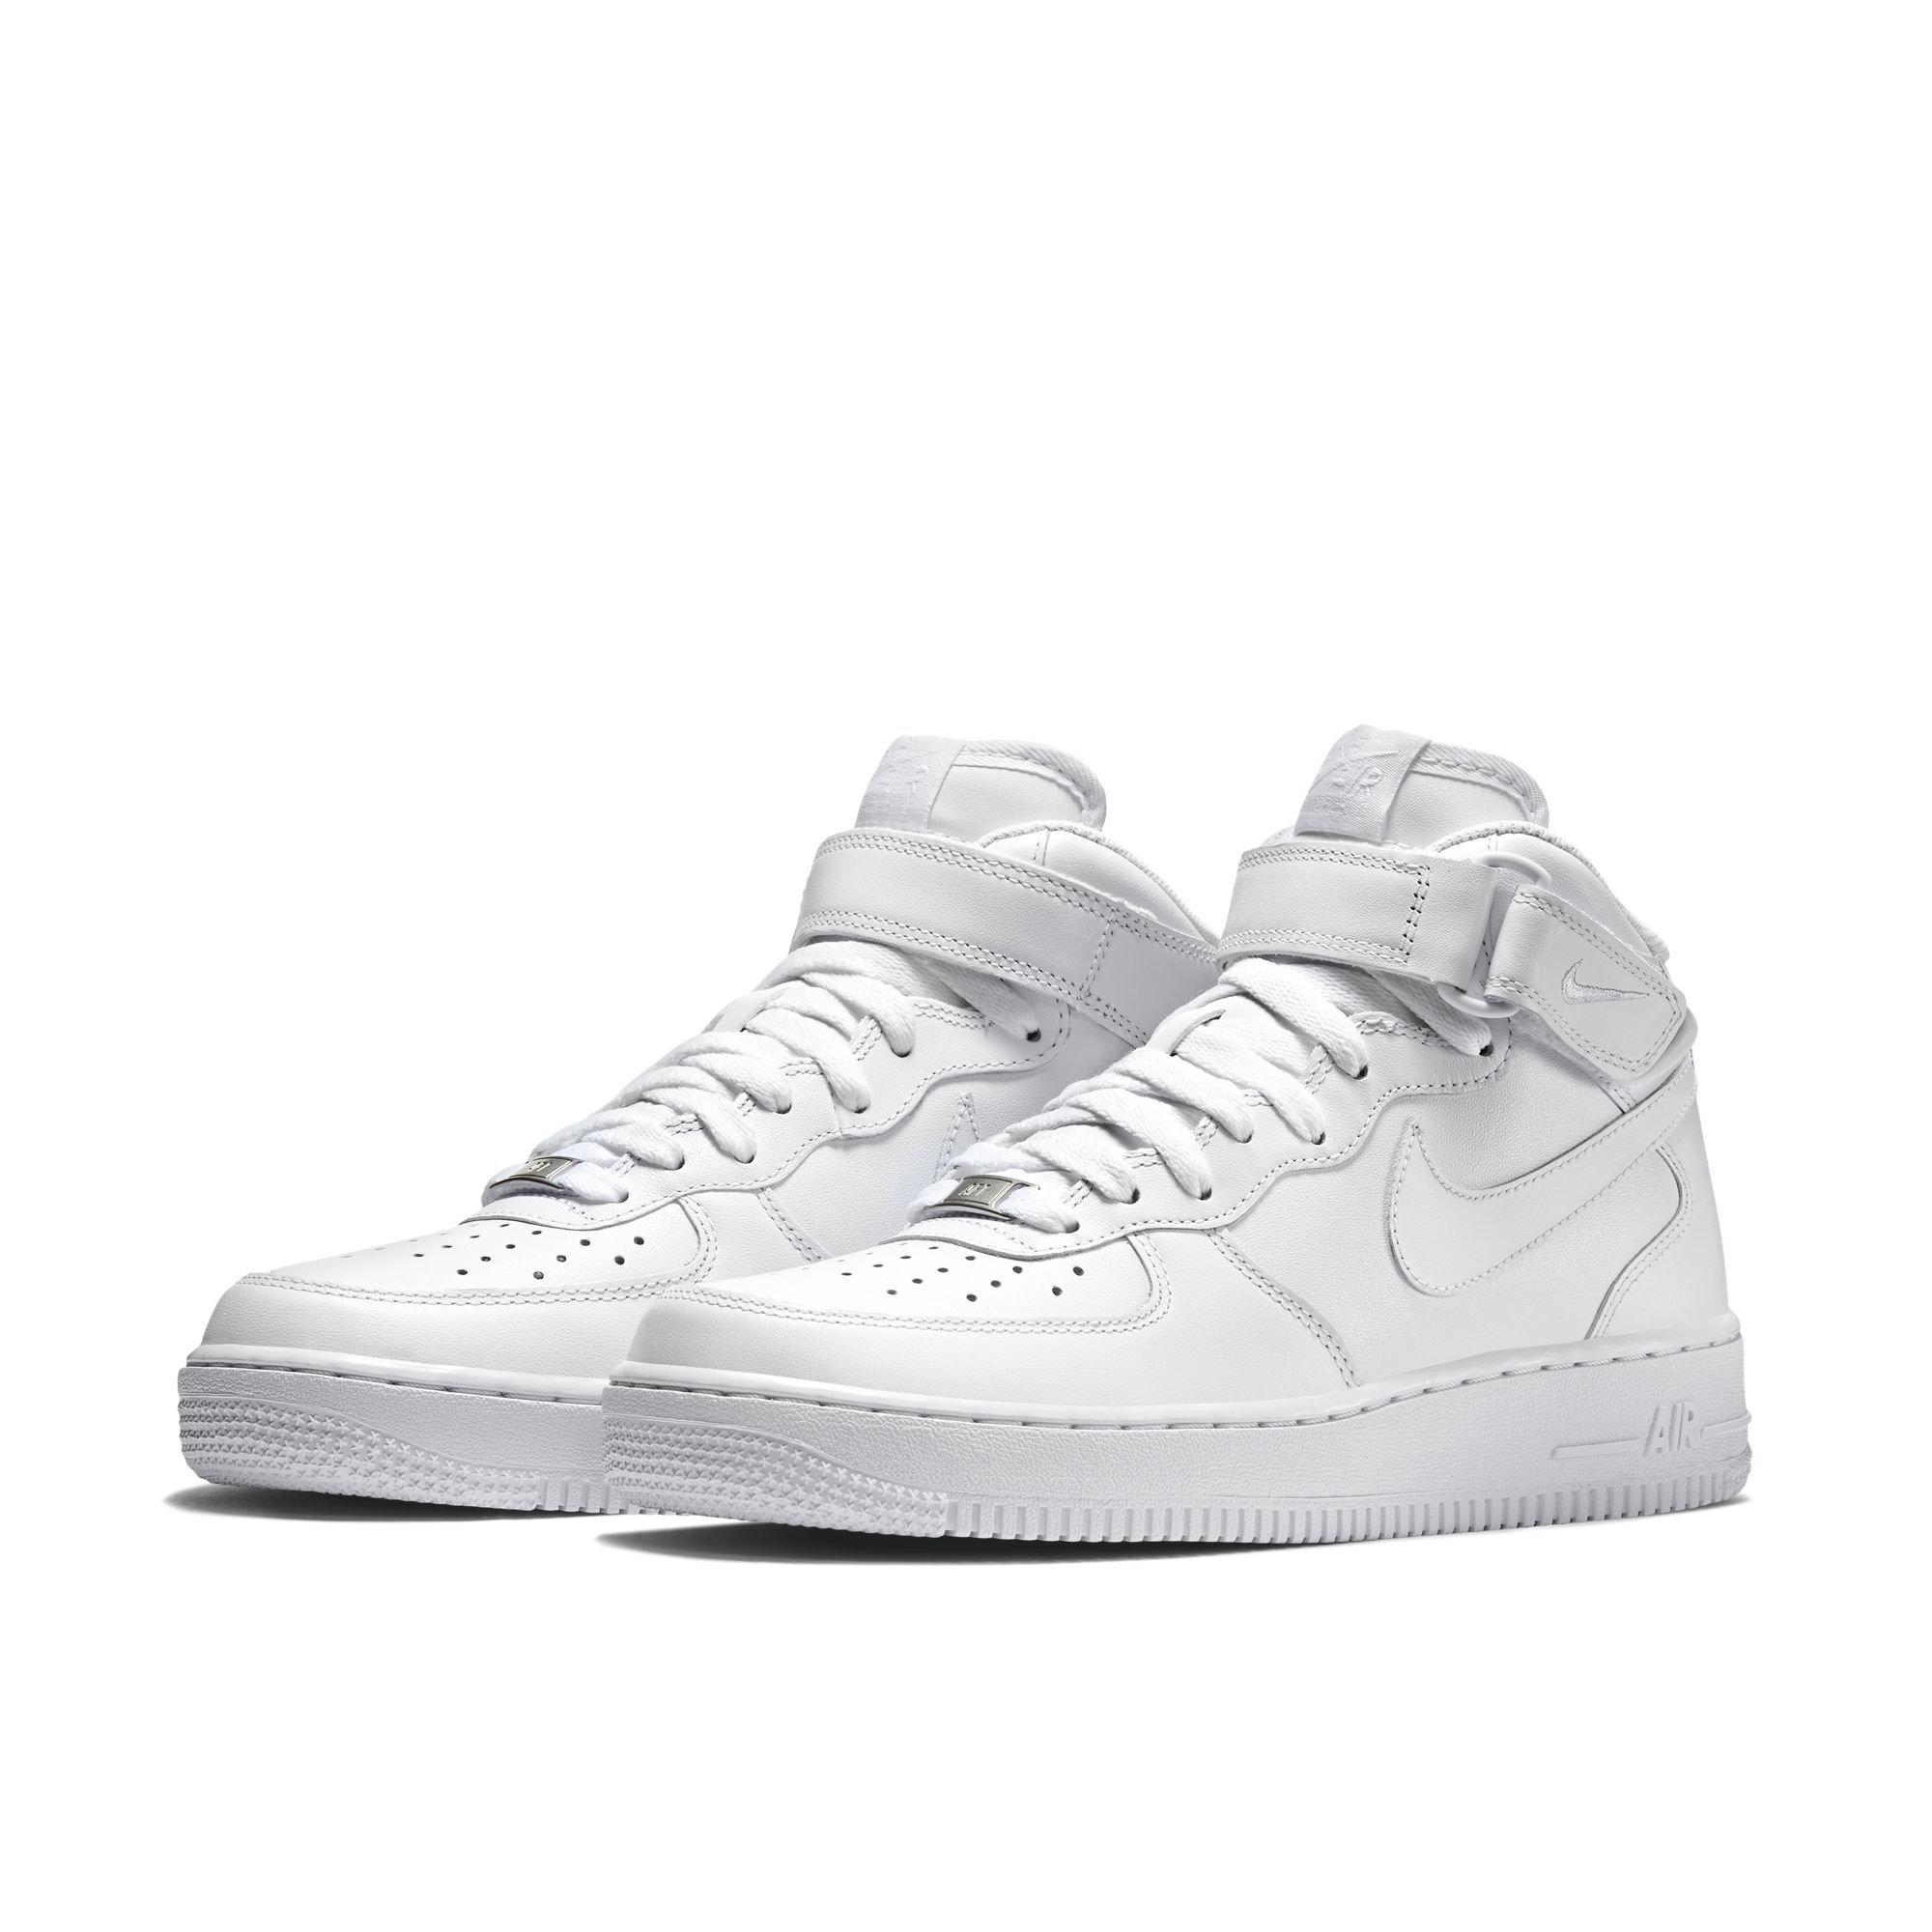 Nike Air Force 1 Mid NYC White - Size 10 Men